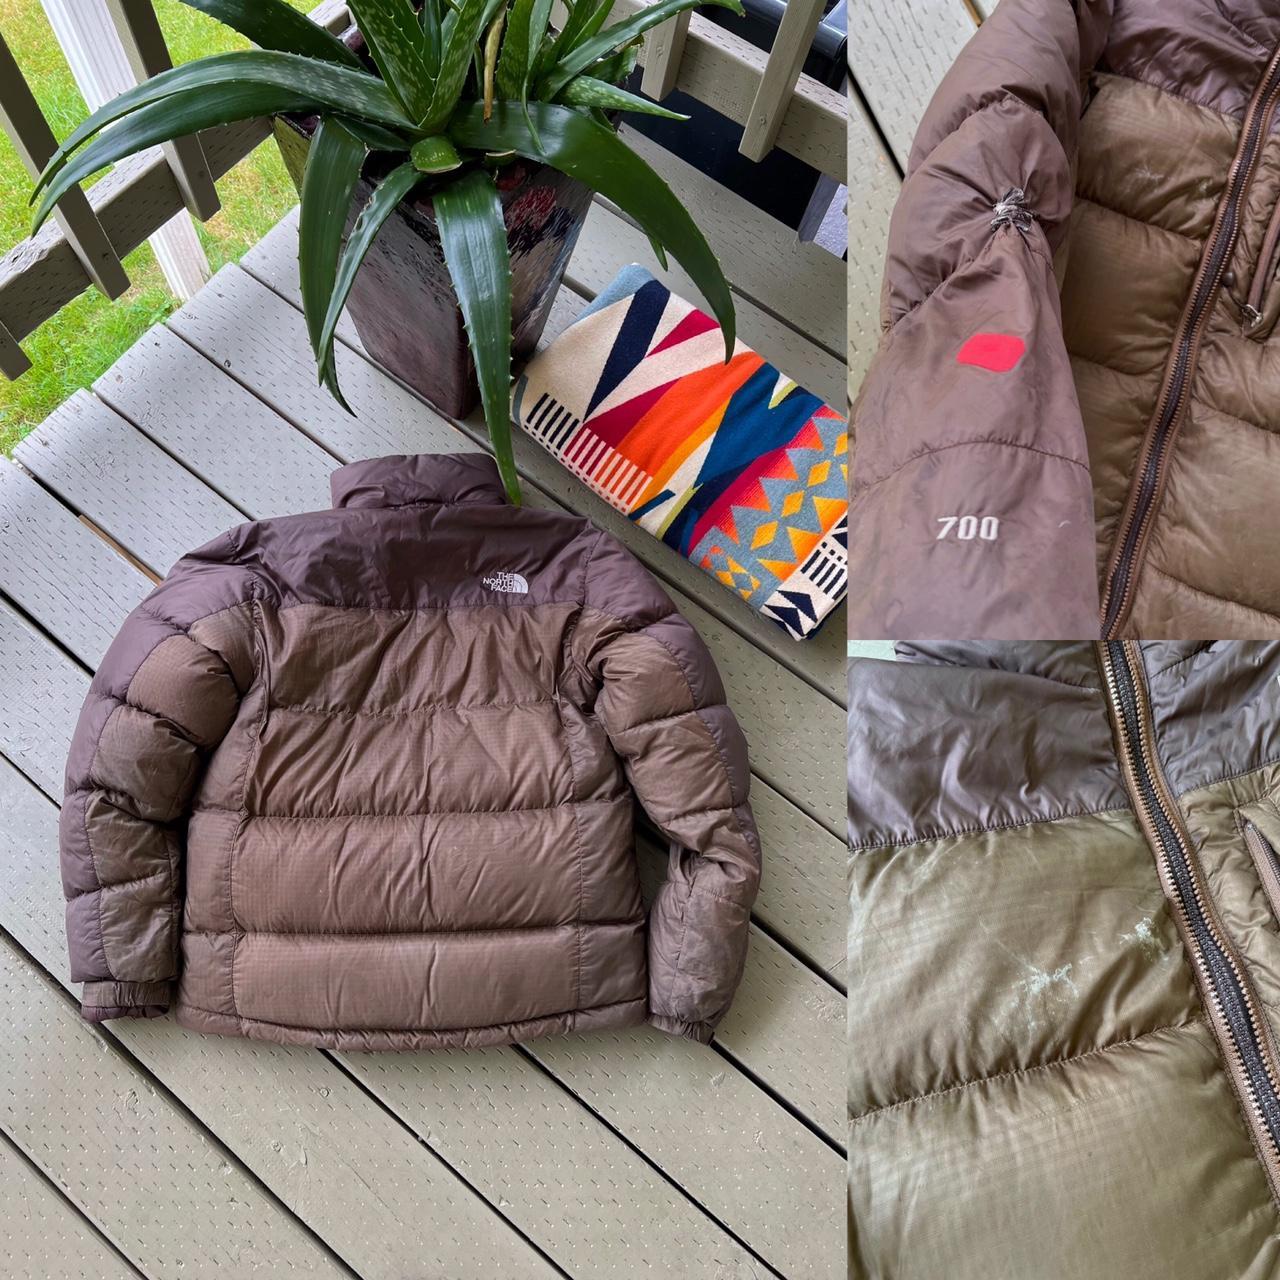 Product Image 4 - Brown north face puffer 700

North